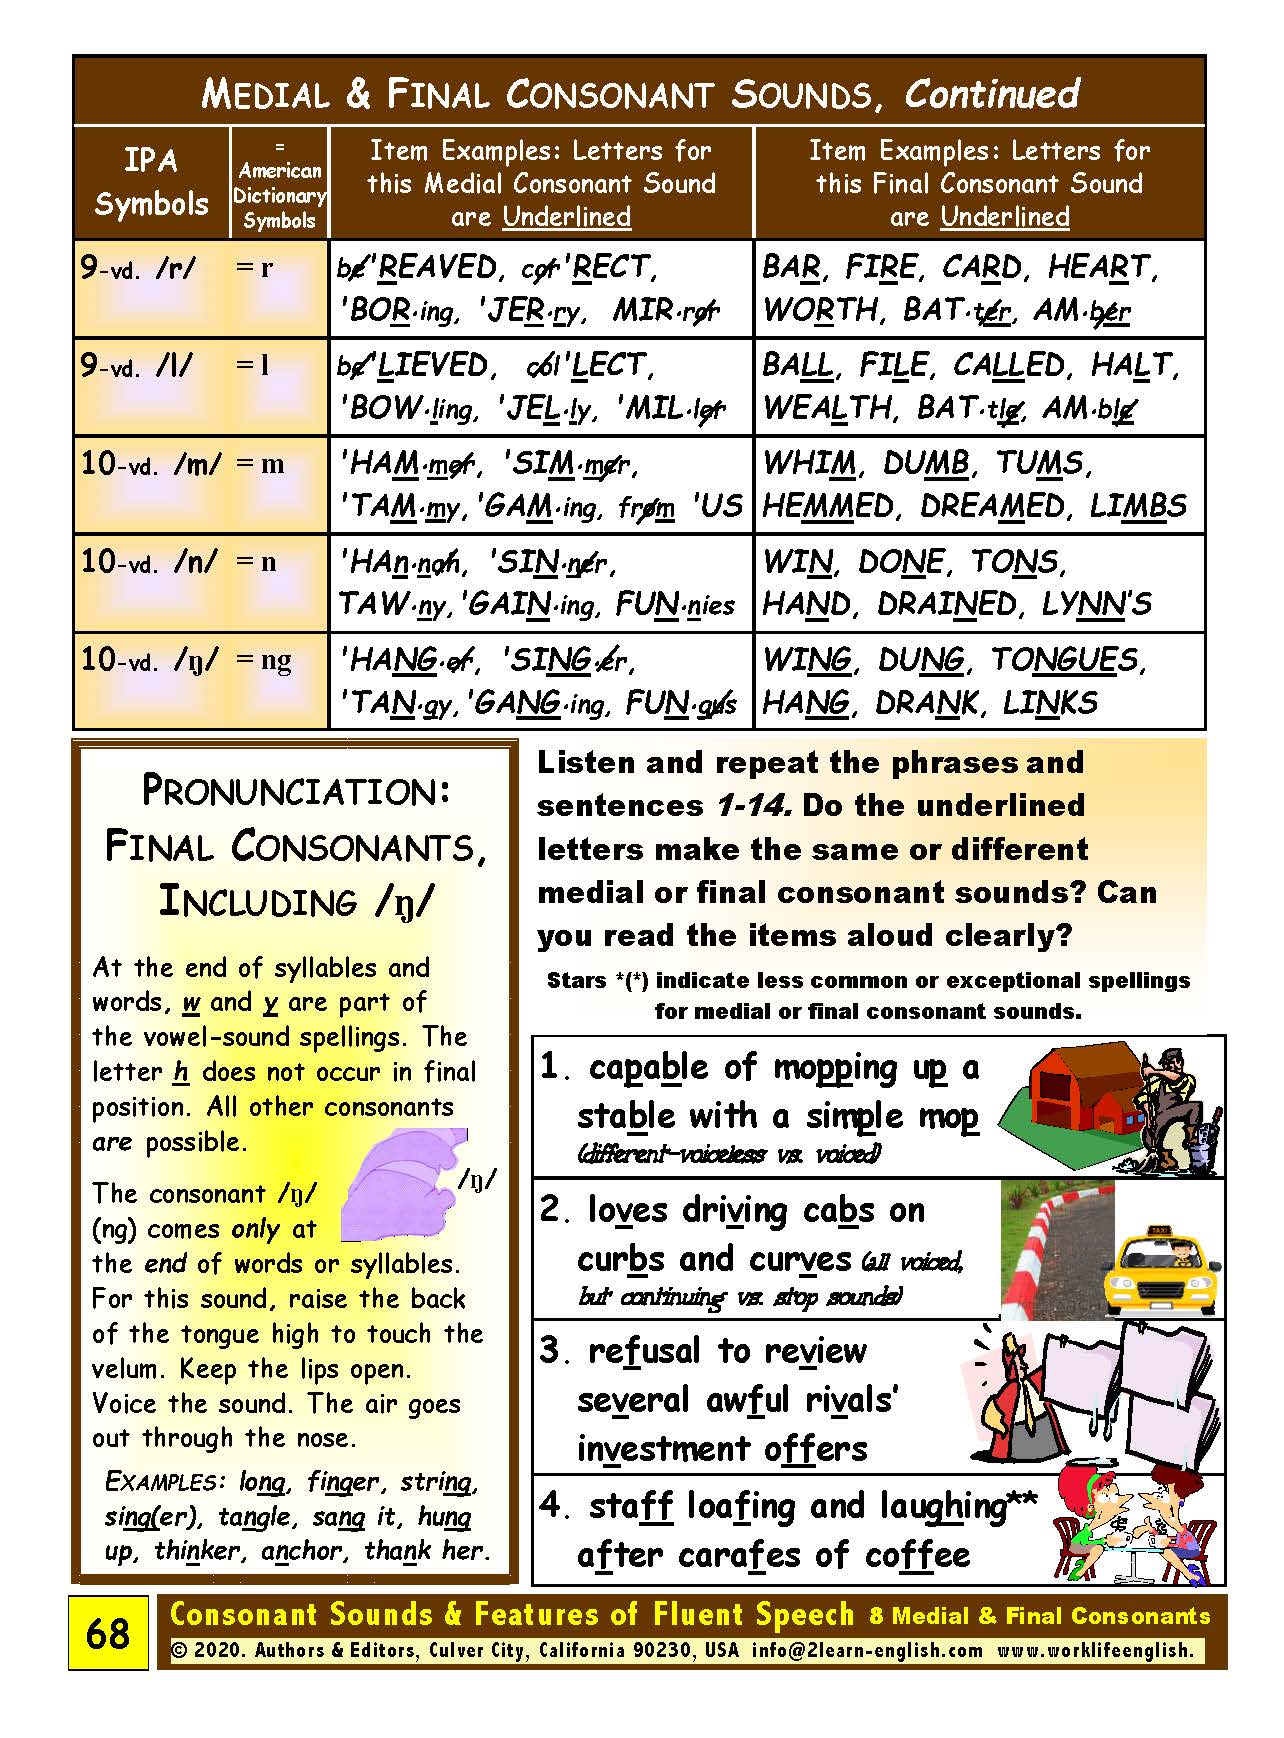 E-03.05 Recognize, Pronounce, Spell, & Contrast Medial & Final Consonants While Naming Actions